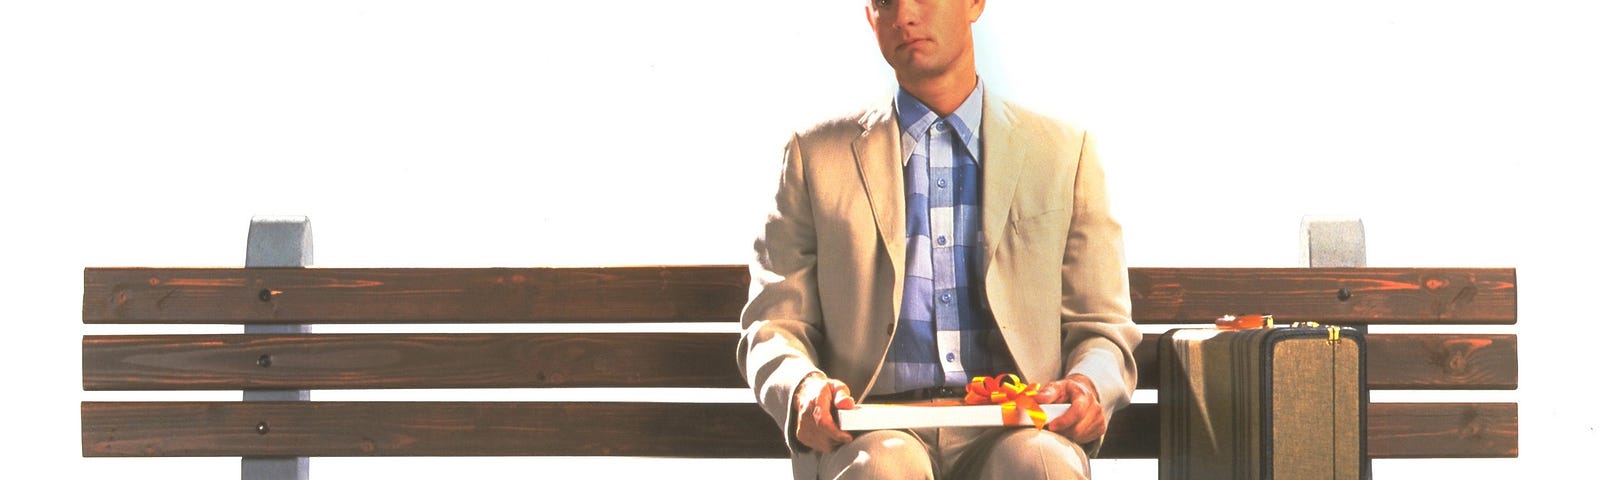 Scene from the movie Forrest Gump. Tom Hanks is sitting on a bench with a box of chocolates on his lap. A small suitcase is next to him on the bench. He is dressed in a tan suit with a blue plaid shirt.